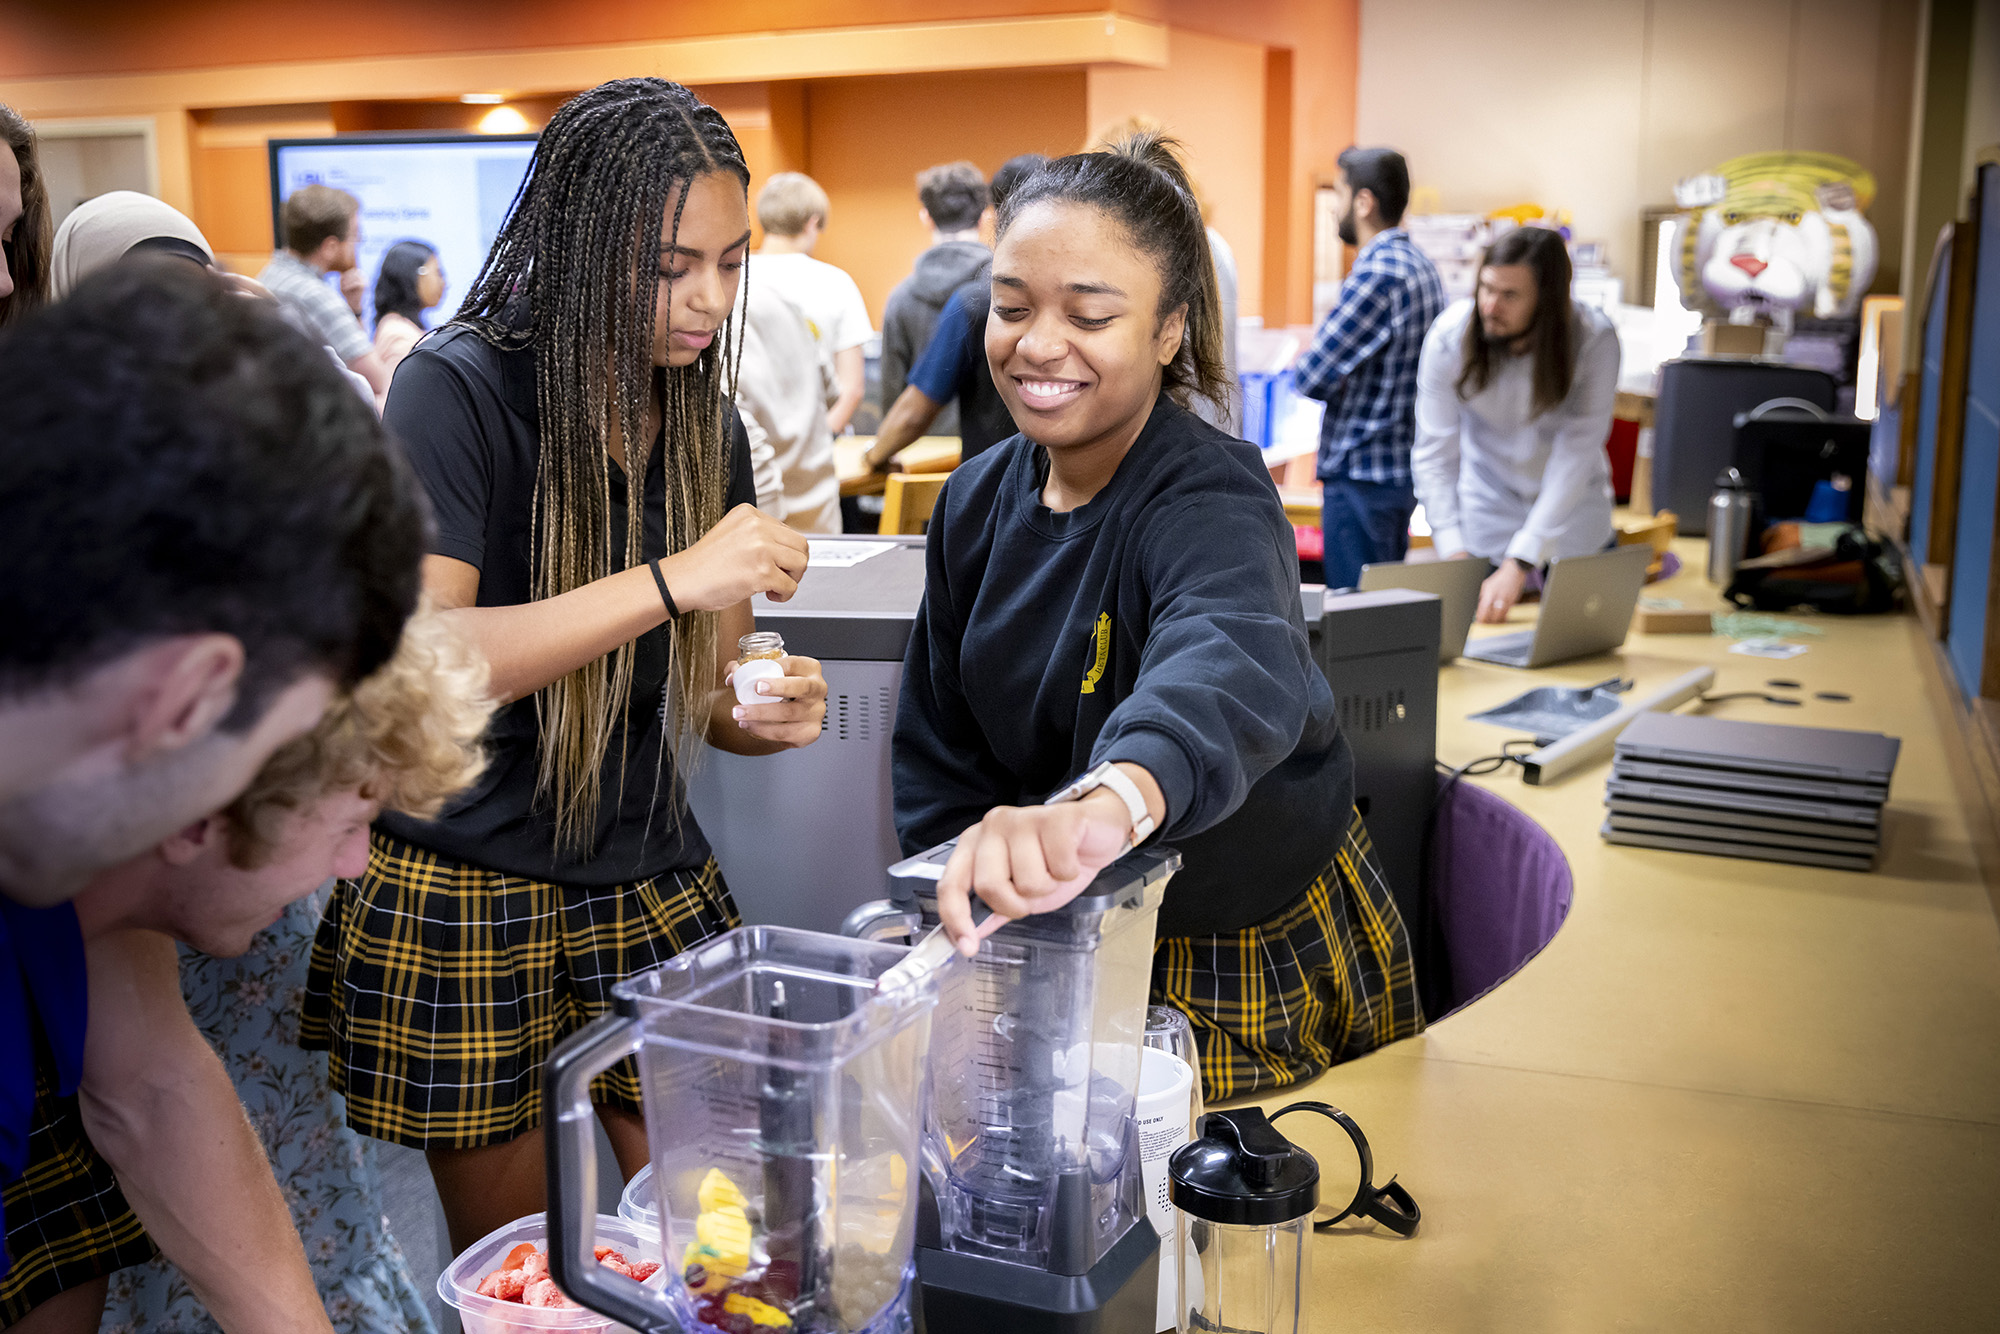 University Lab School 10th graders Olivia Sterling and Brooke Crain make cyber smoothies.